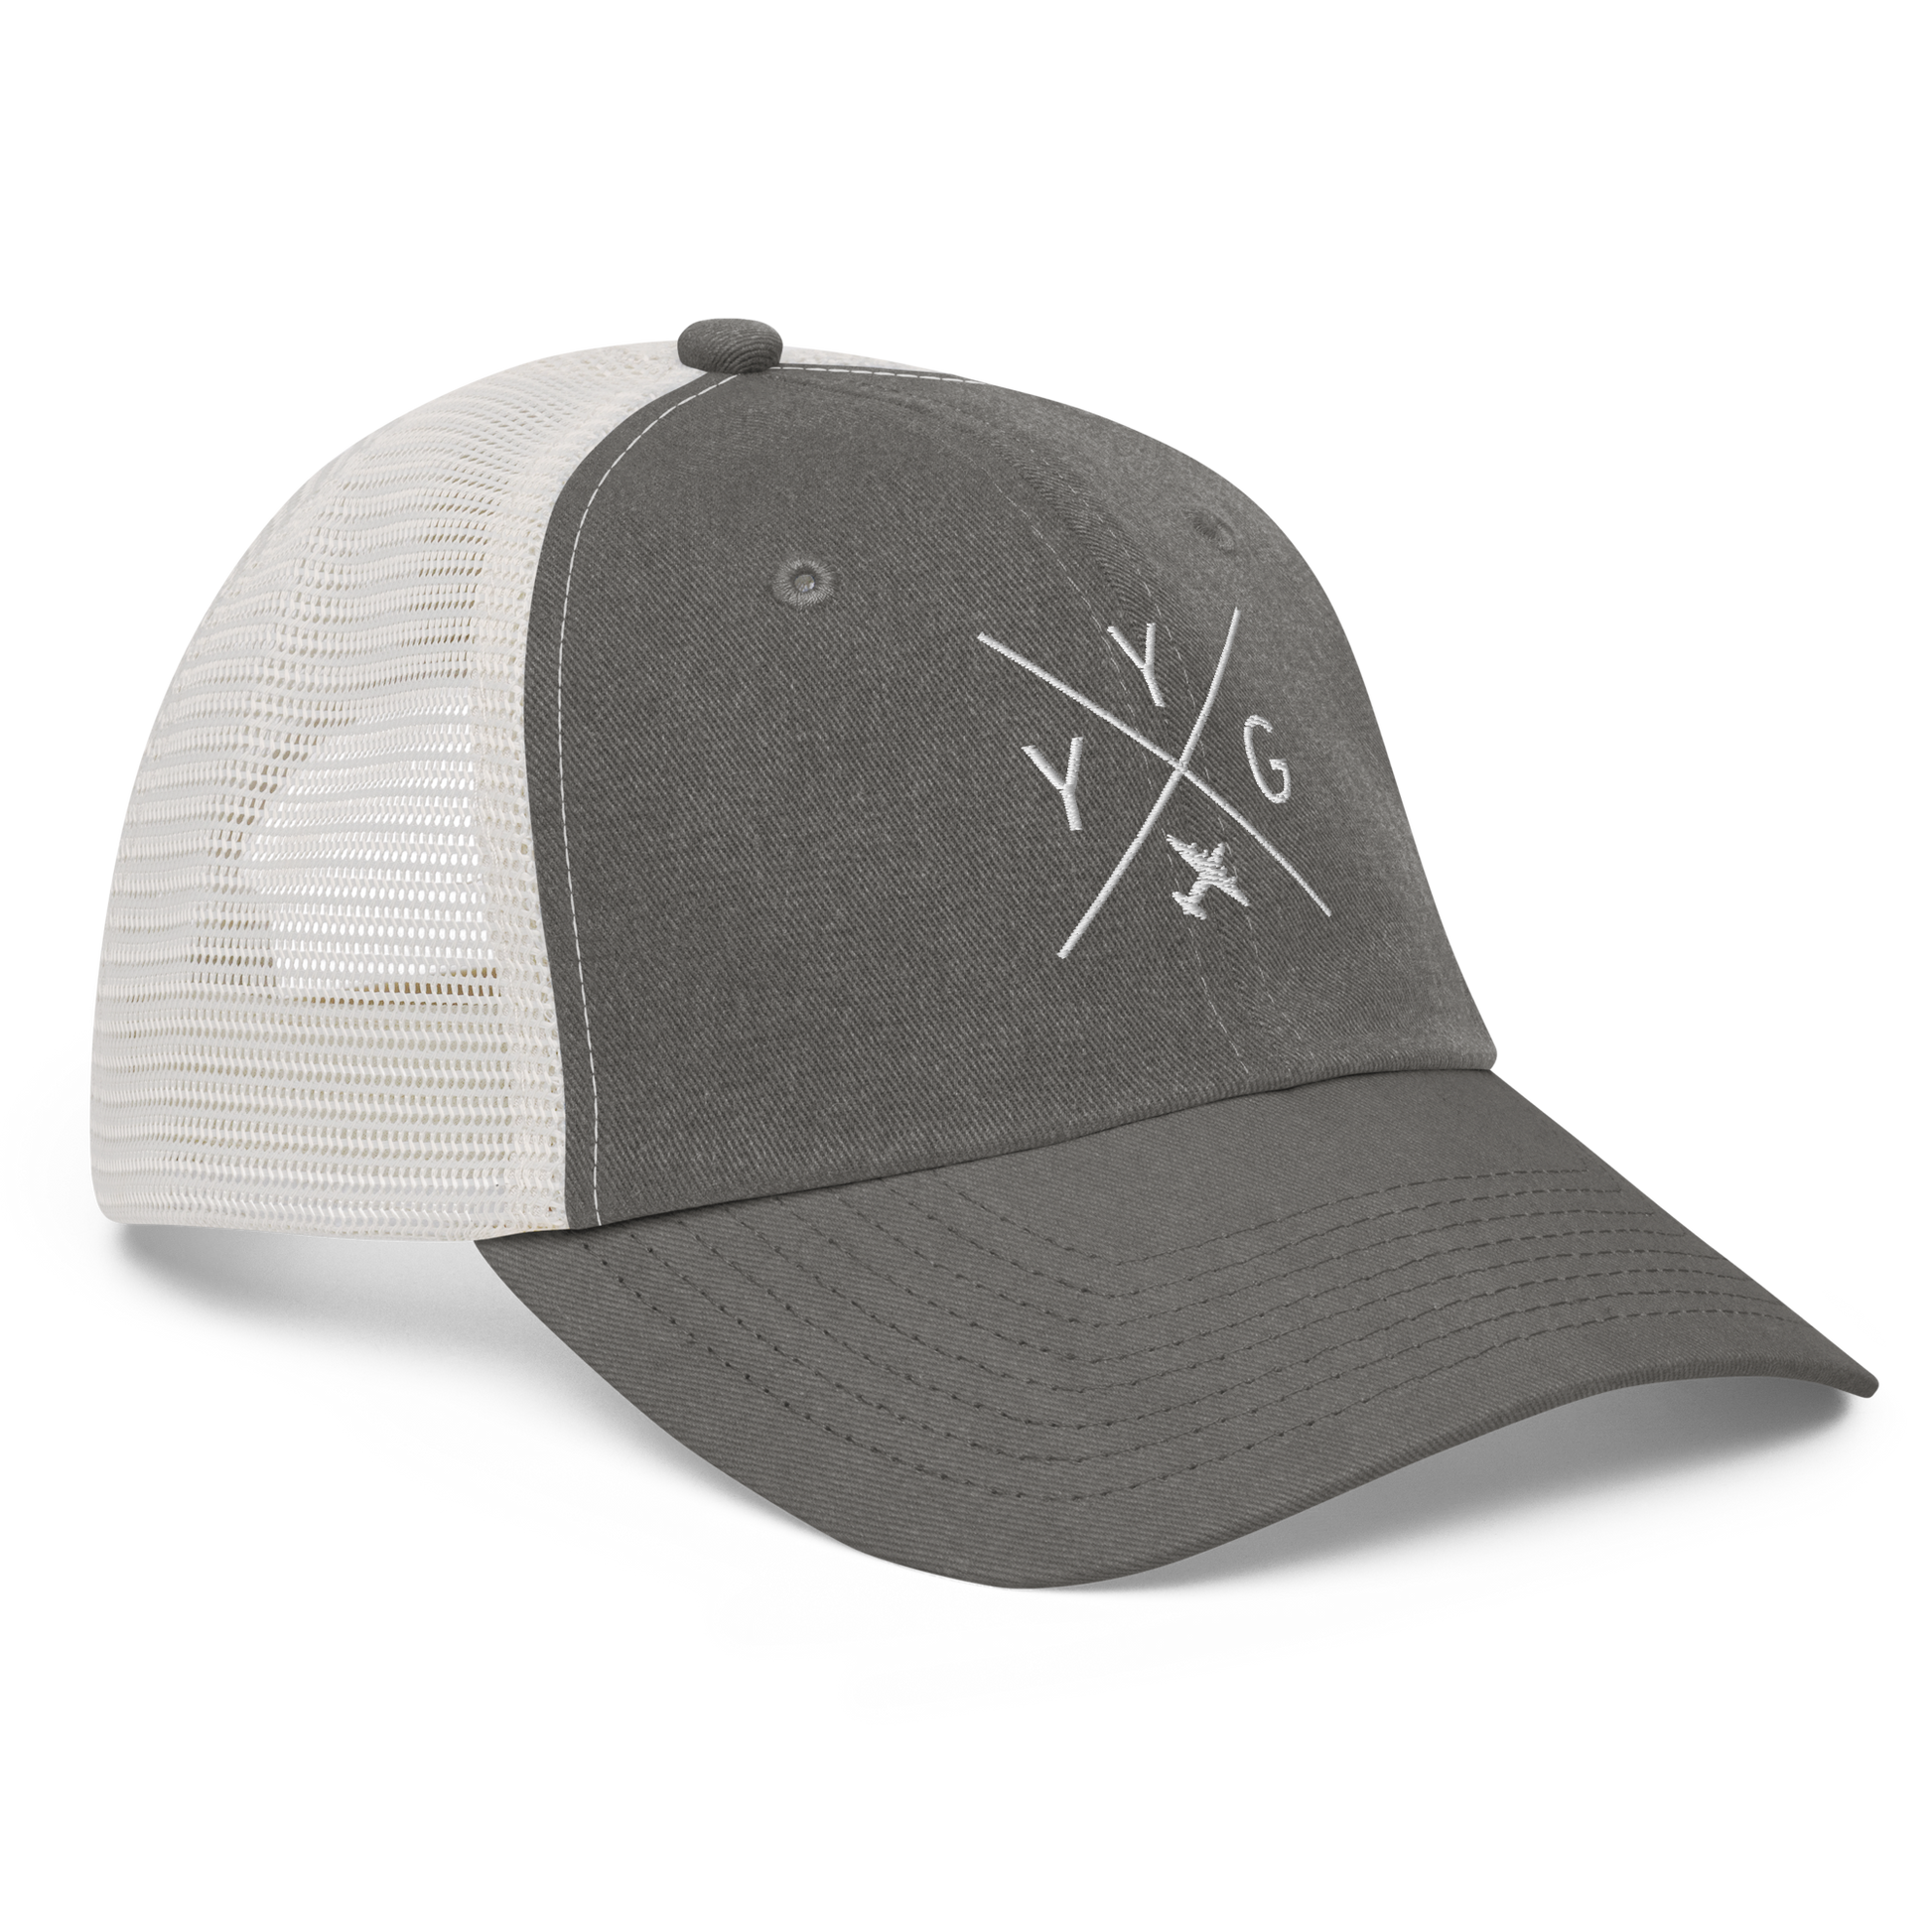 YHM Designs - YYG Charlottetown Pigment-Dyed Trucker Cap - Crossed-X Design with Airport Code and Vintage Propliner - White Embroidery - Image 10